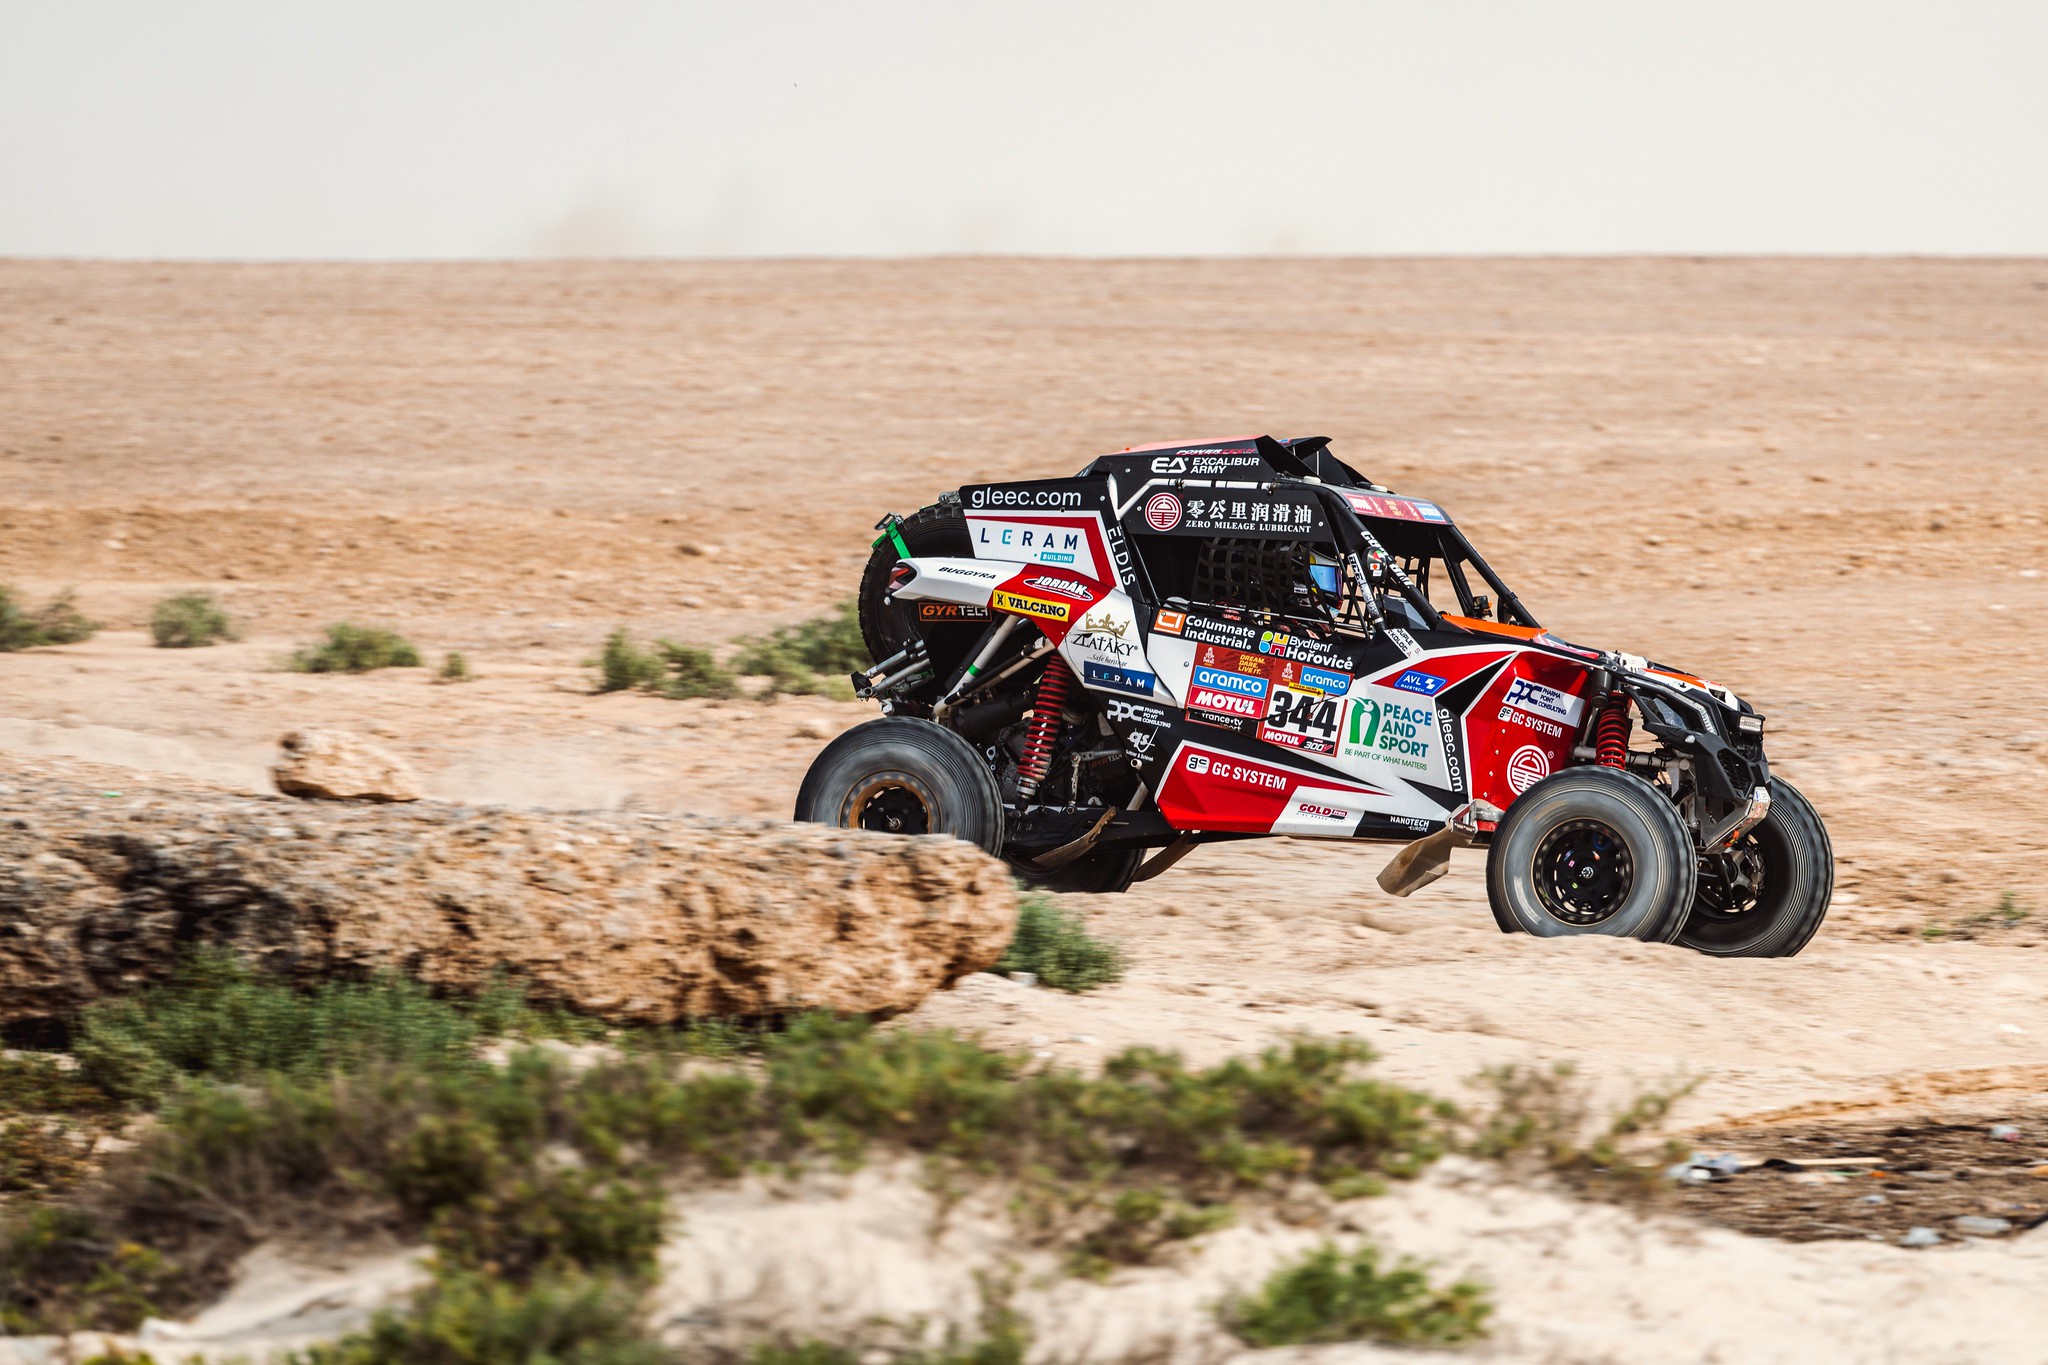 Dakar prologue: Šoltys fourth in truck category for Buggyra ZM Racing